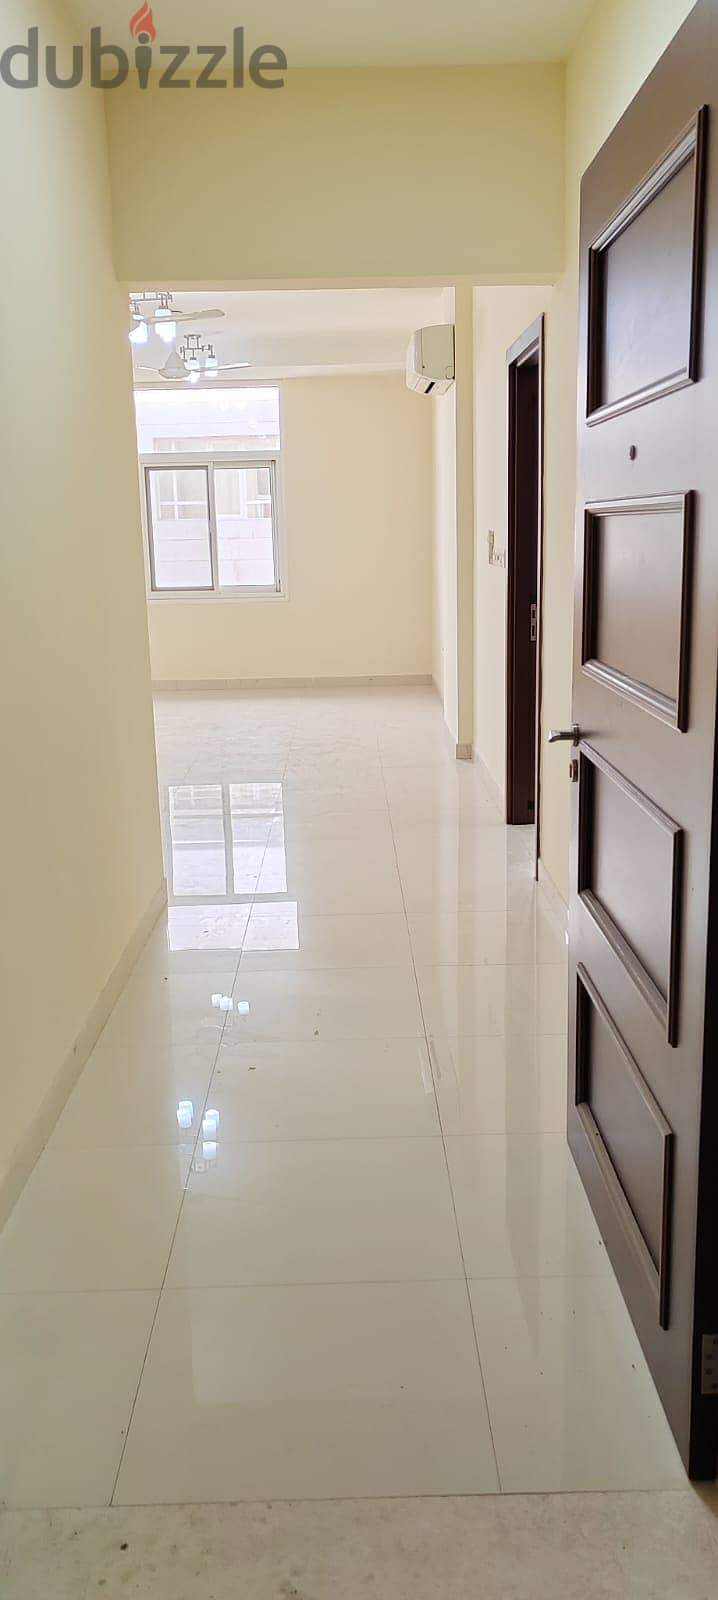 Amazing Offer!!! 2 BHK Spacious Flat, Free Wifi,1 Month Free Main Road 2